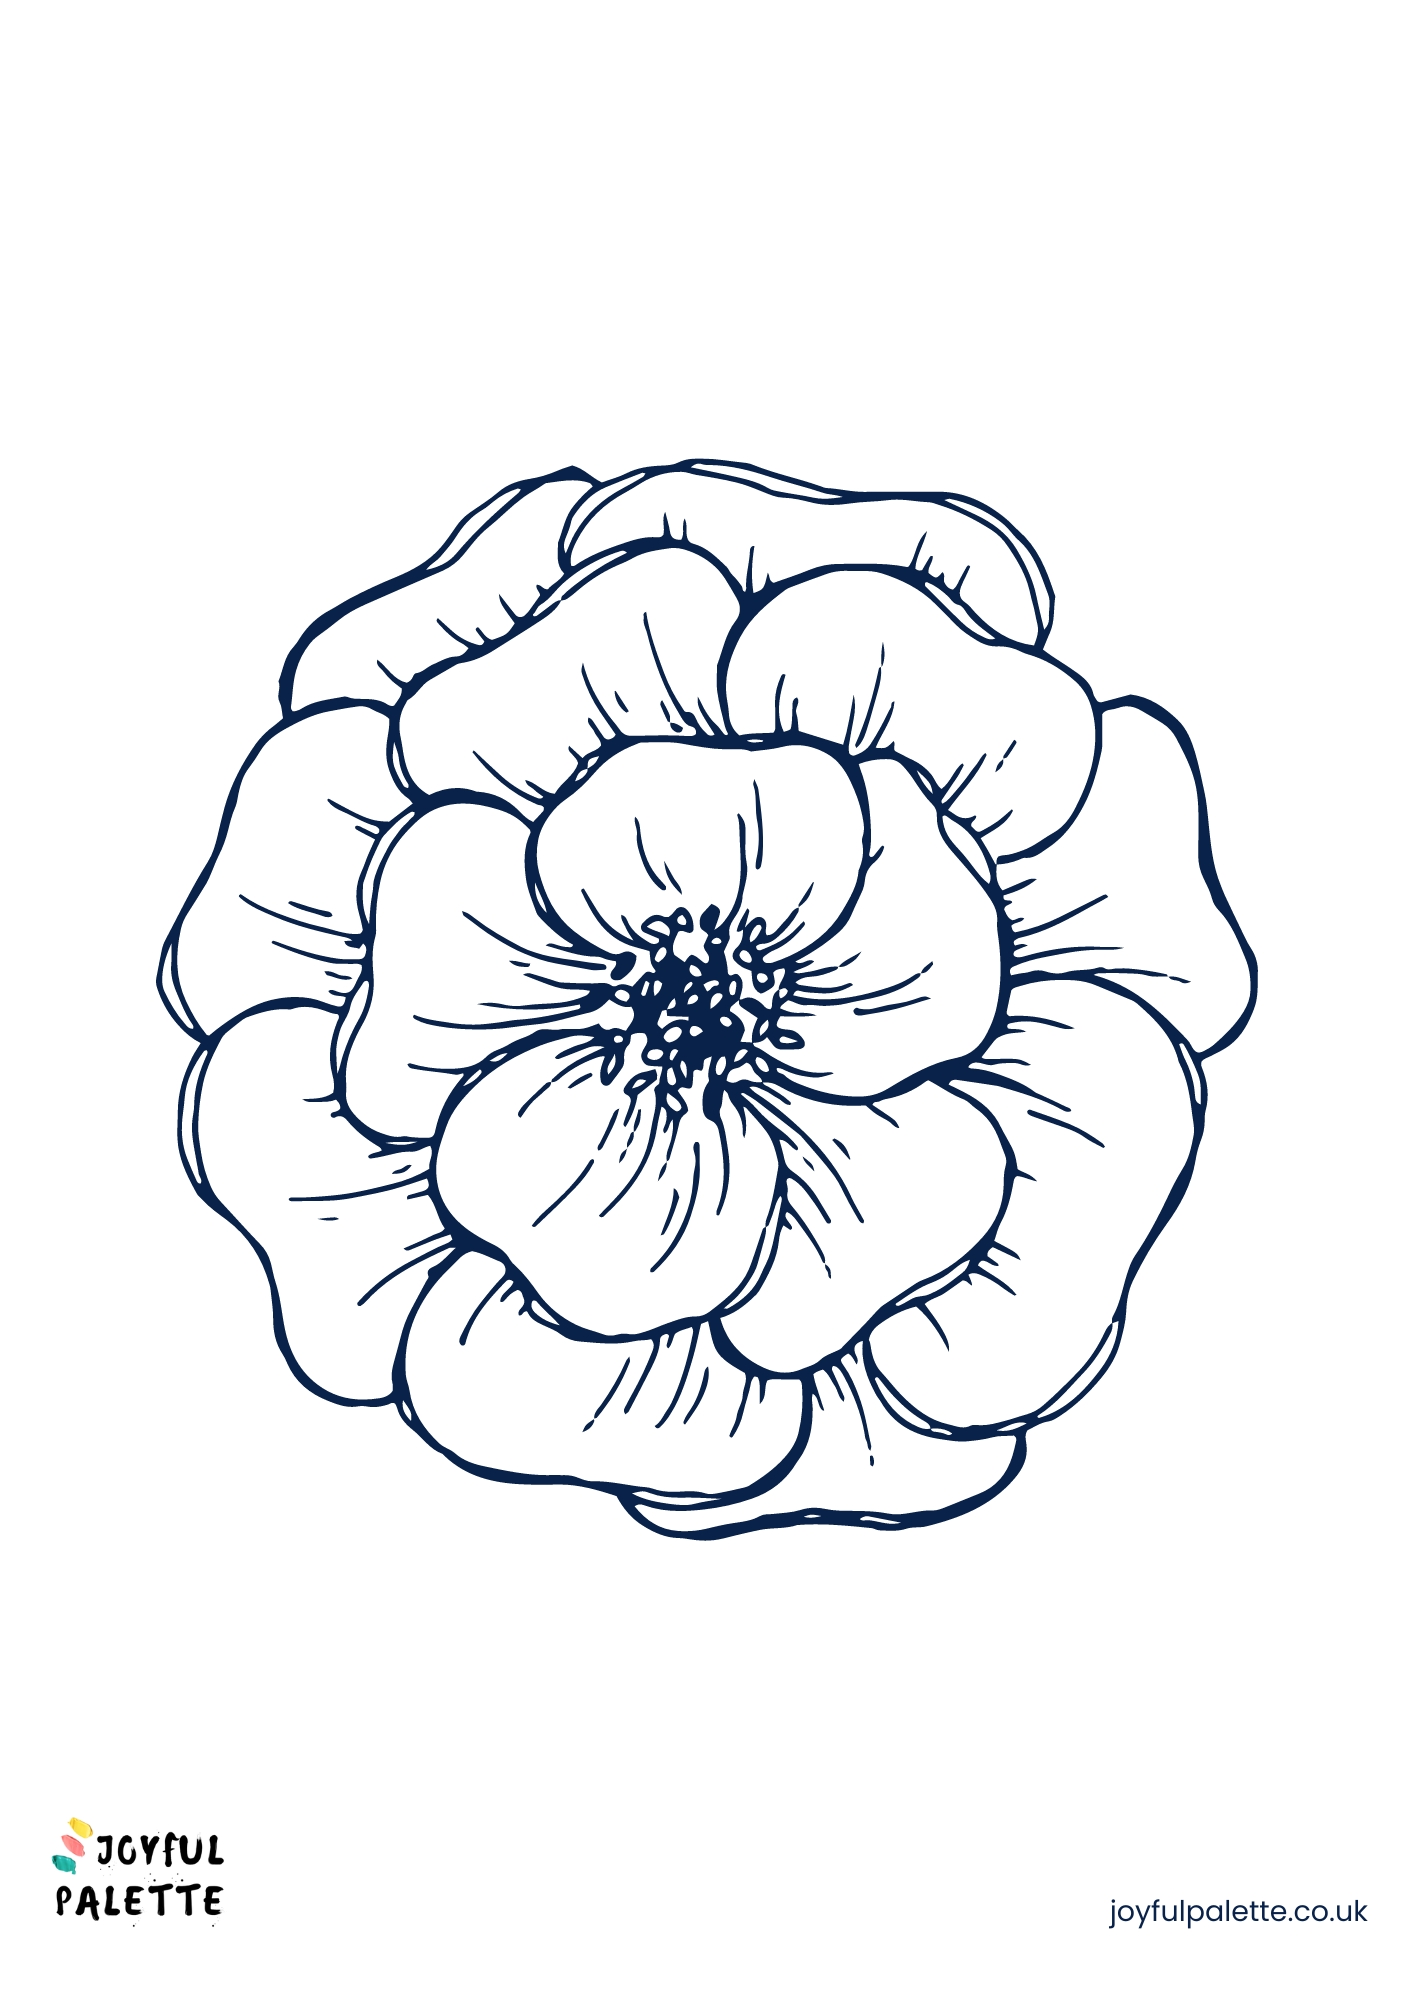 Easy Flowers to Draw